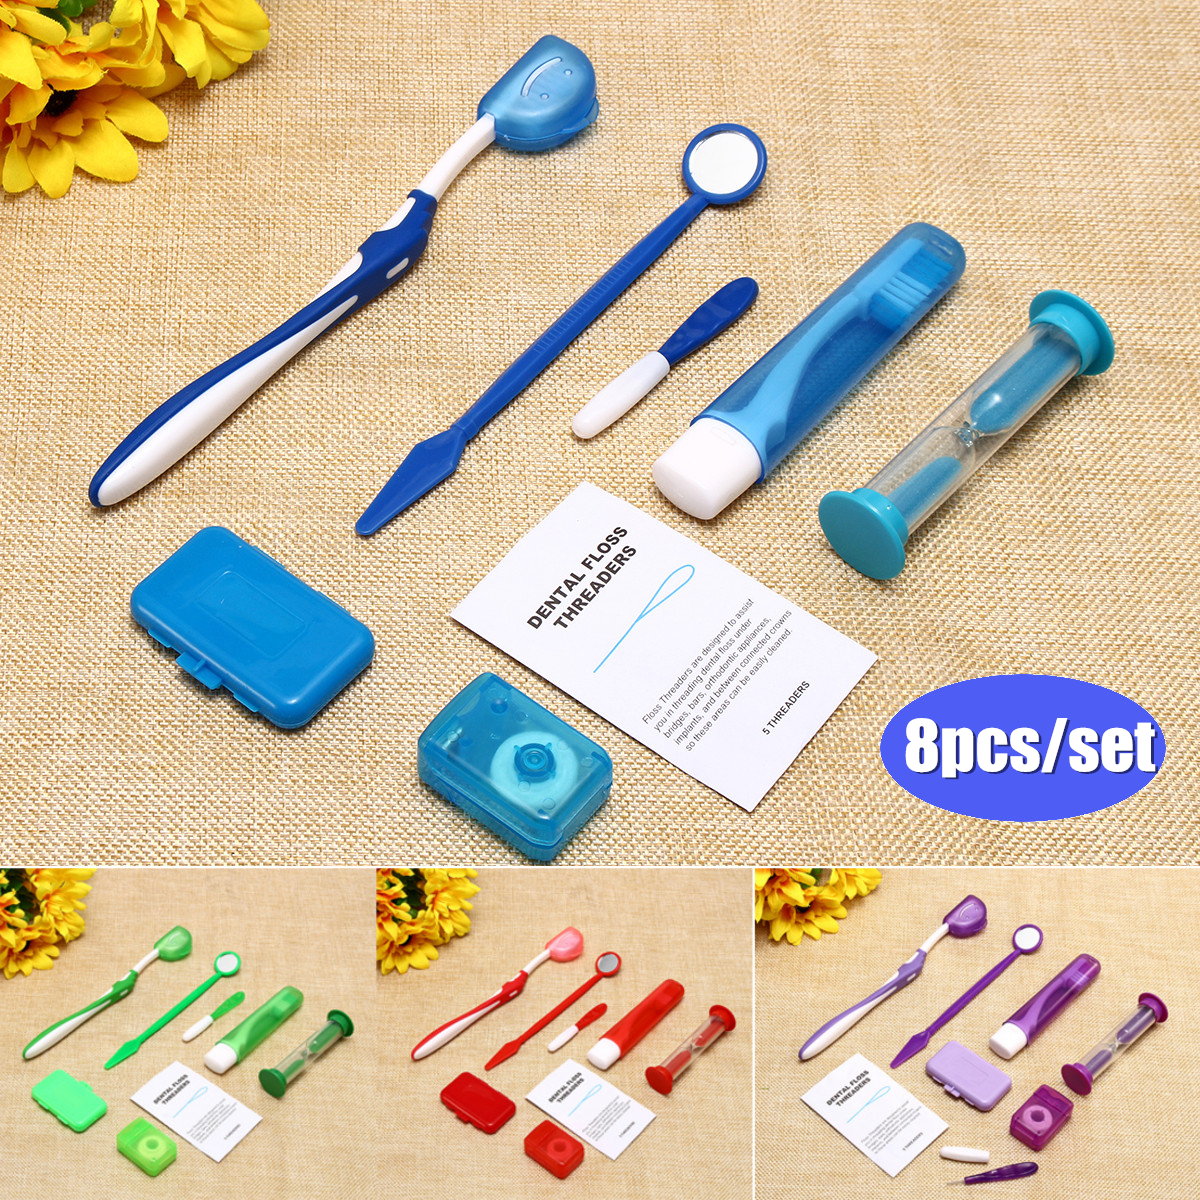 4 Colors Dental Teeth Orthodontic Kits 8Pcs/Set Oral Cleaning Care Whitening Tool Suit Interdental Brush Floss Thread Wax Mirror